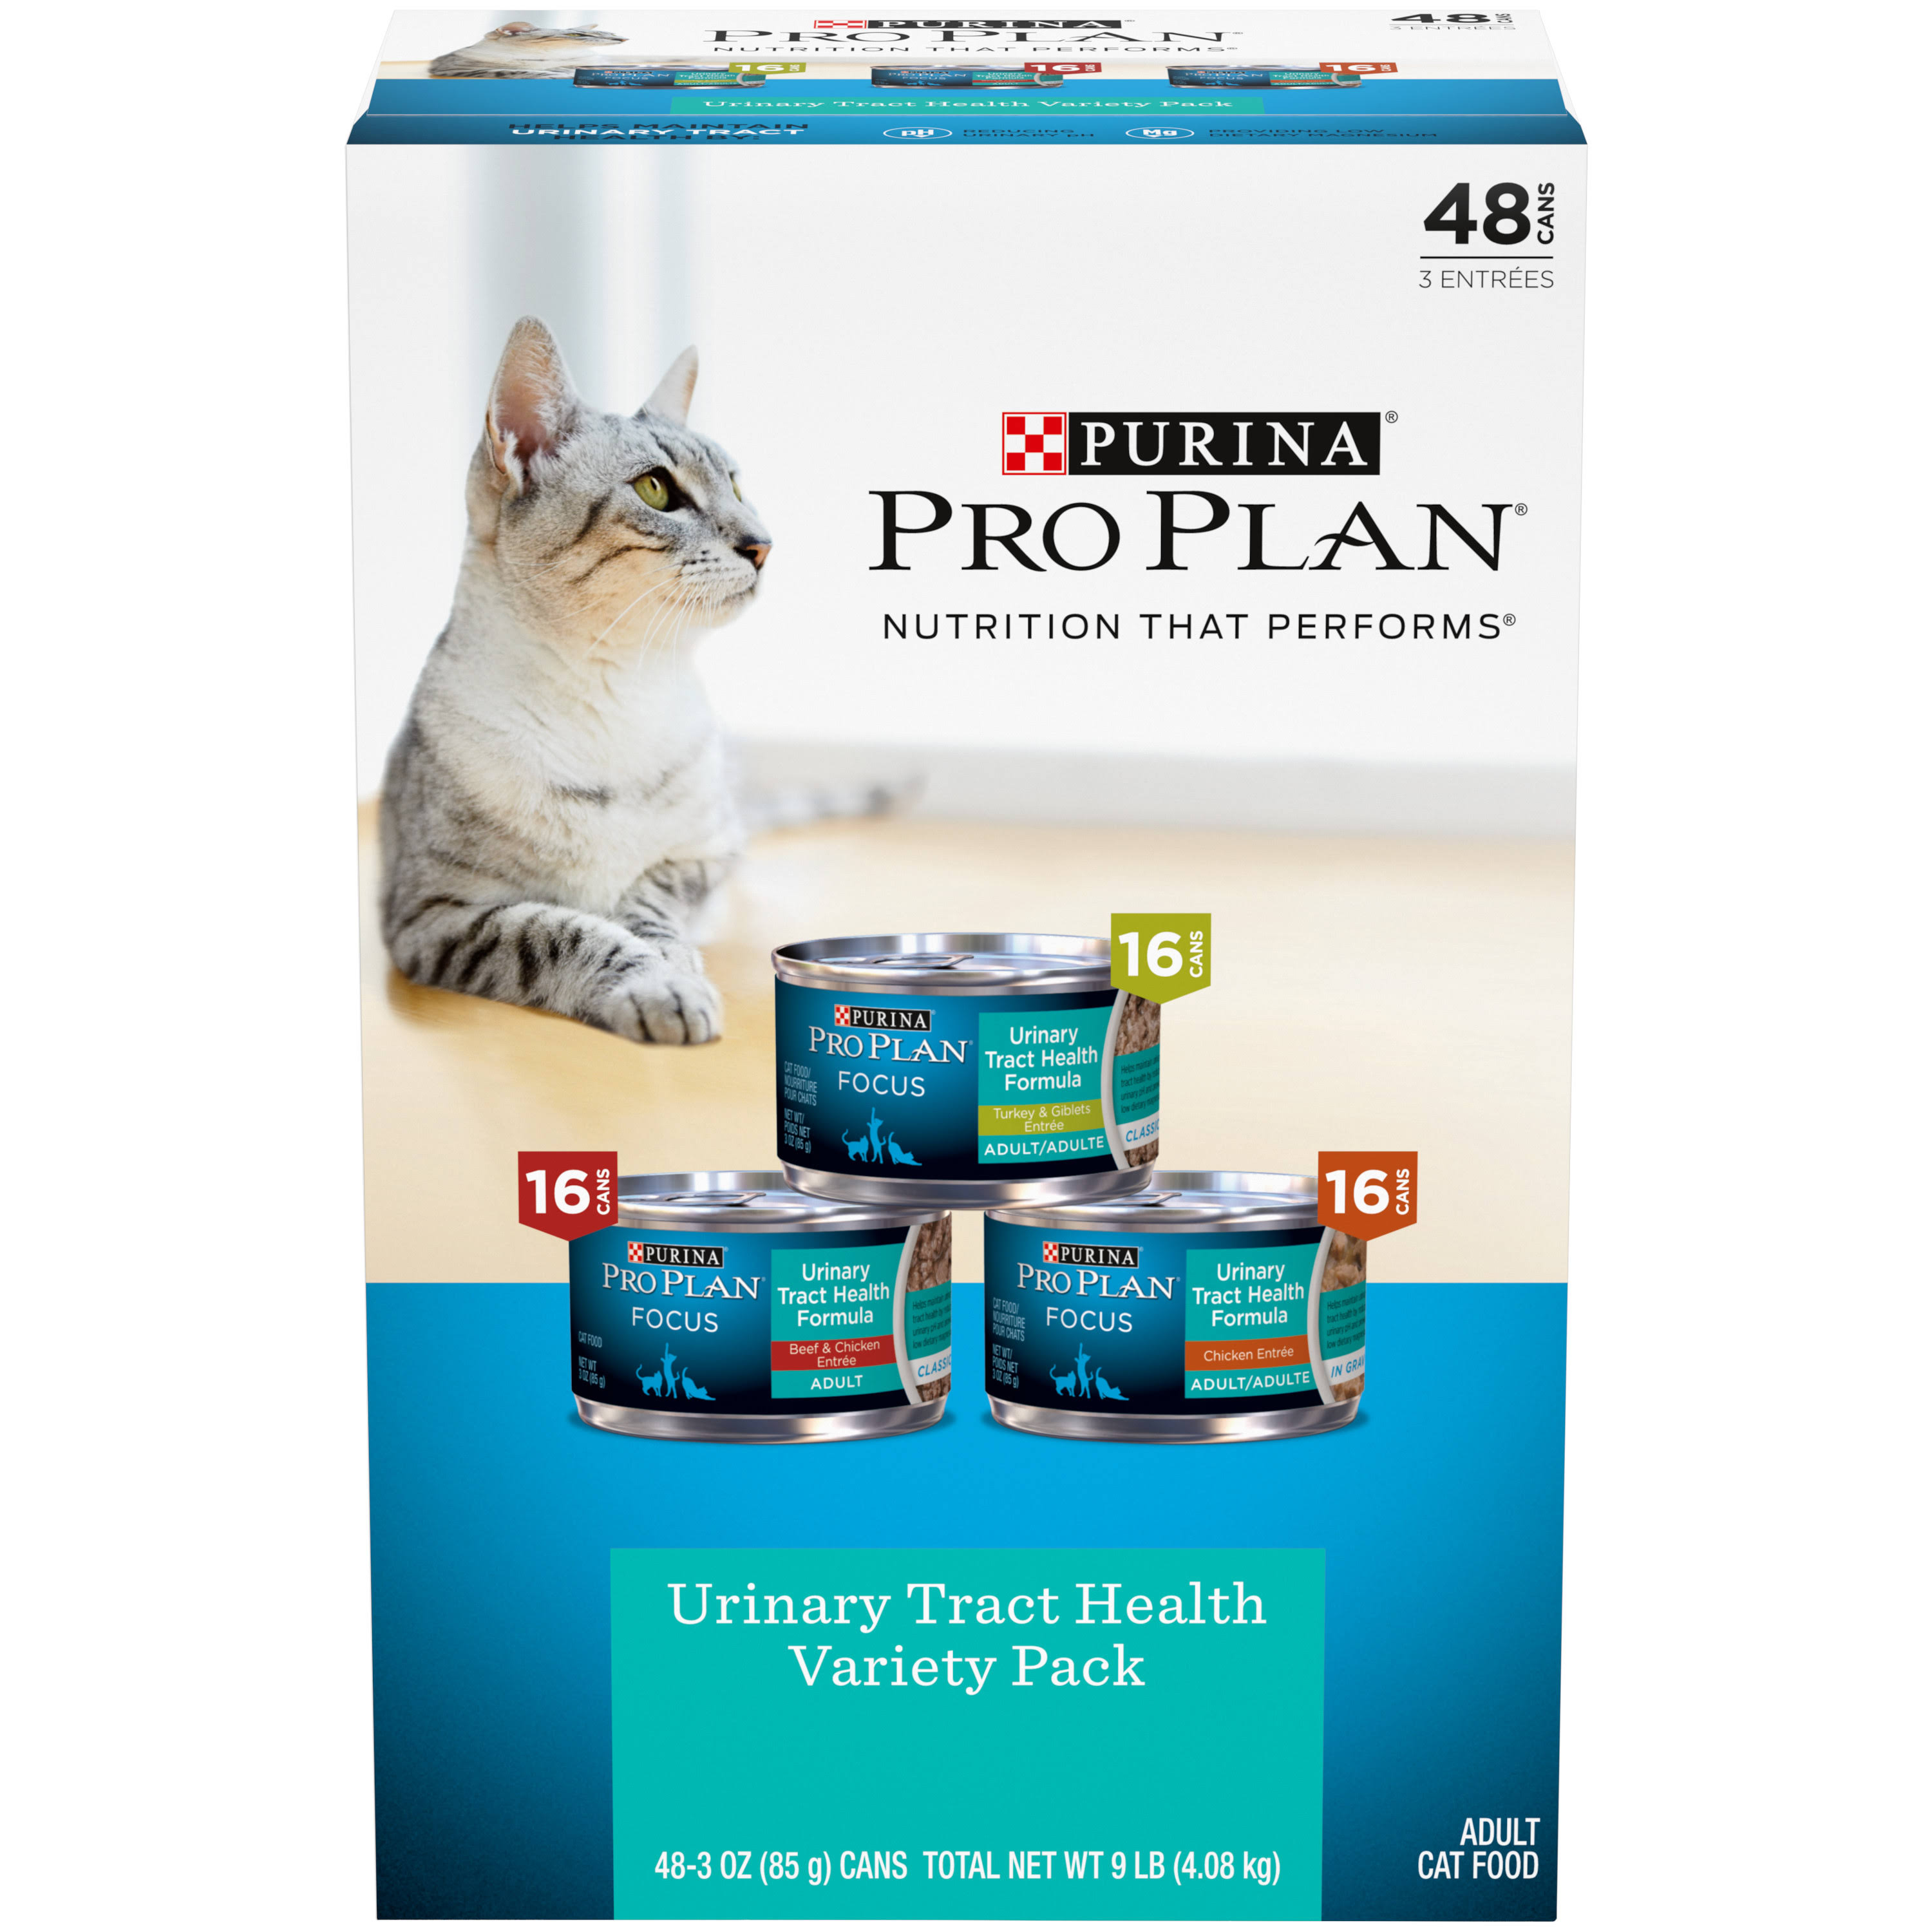 Purina Pro Plan Urinary Tract Health Poultry & Beef Variety Pack Wet Cat Food (48) 3 oz. Cans